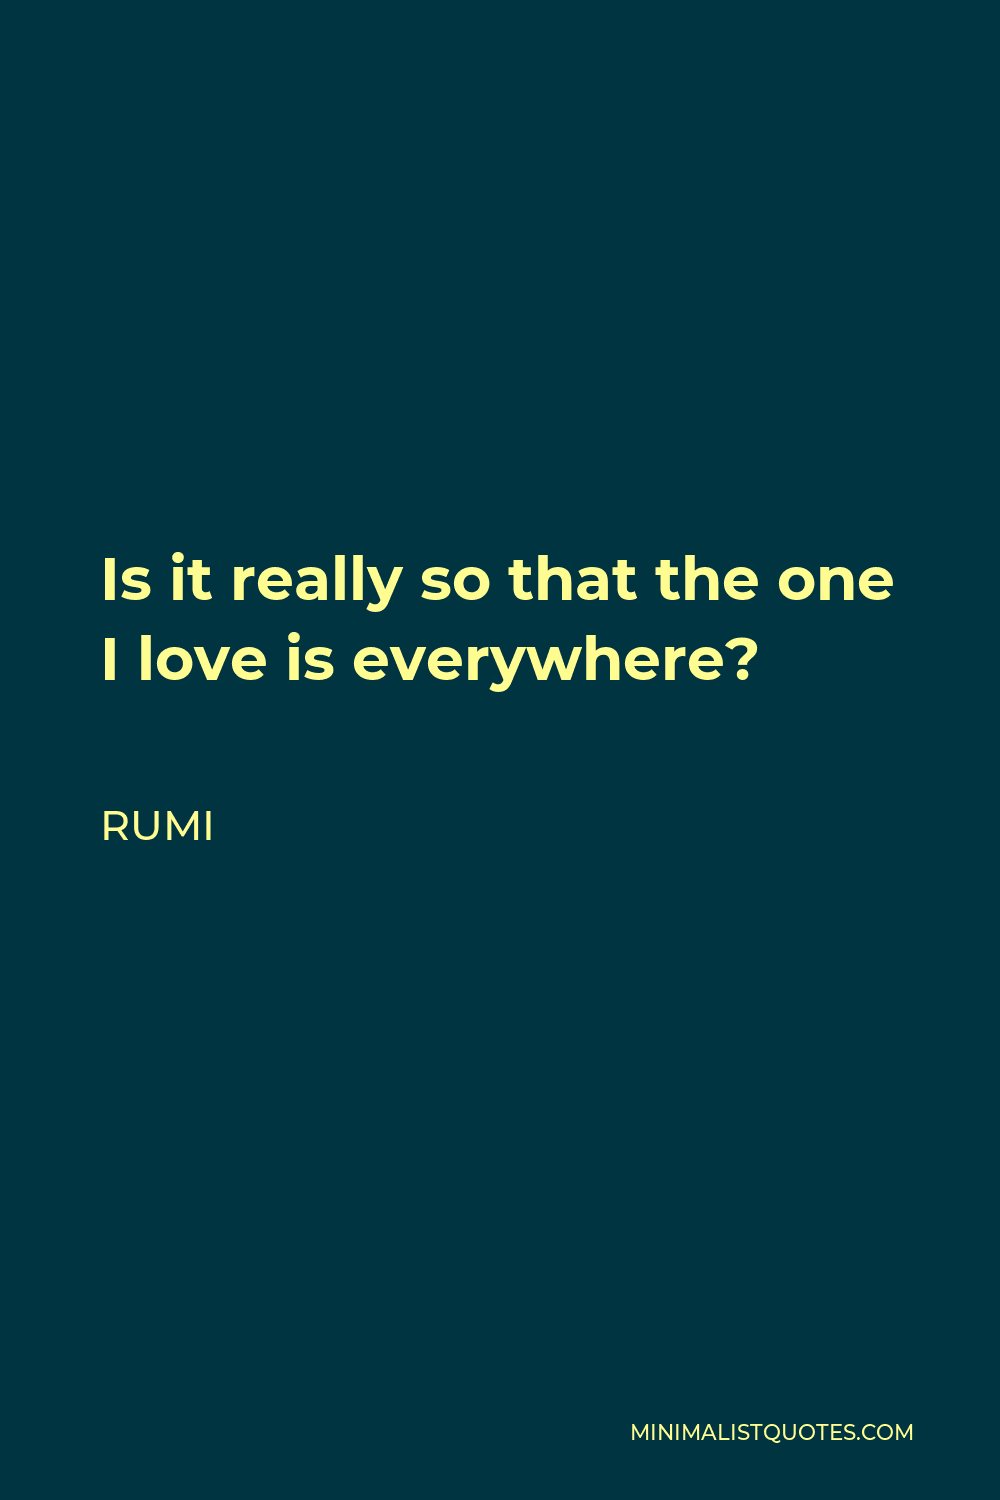 Rumi Quote - Is it really so that the one I love is everywhere?